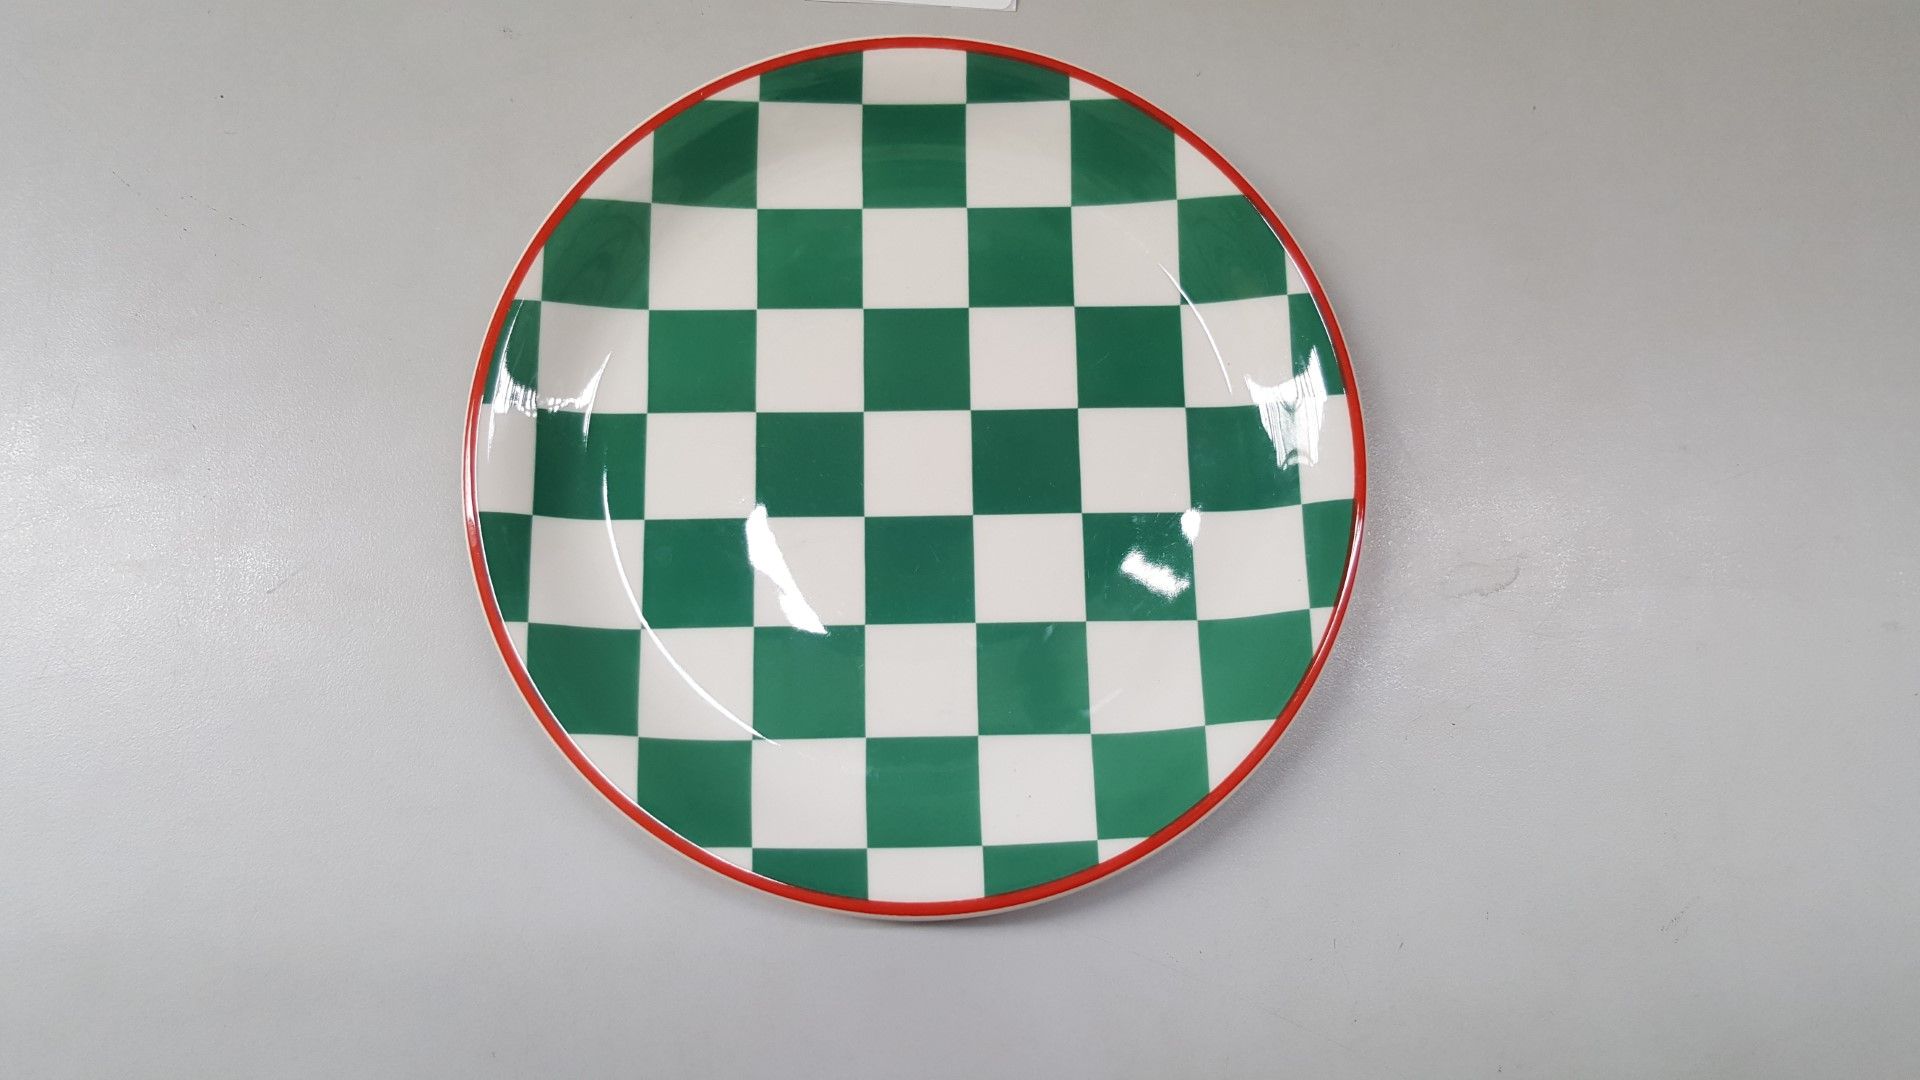 20 x Steelite Plates Checkered Green&White With Red Outline 20CM - Ref CQ284 - Image 4 of 4